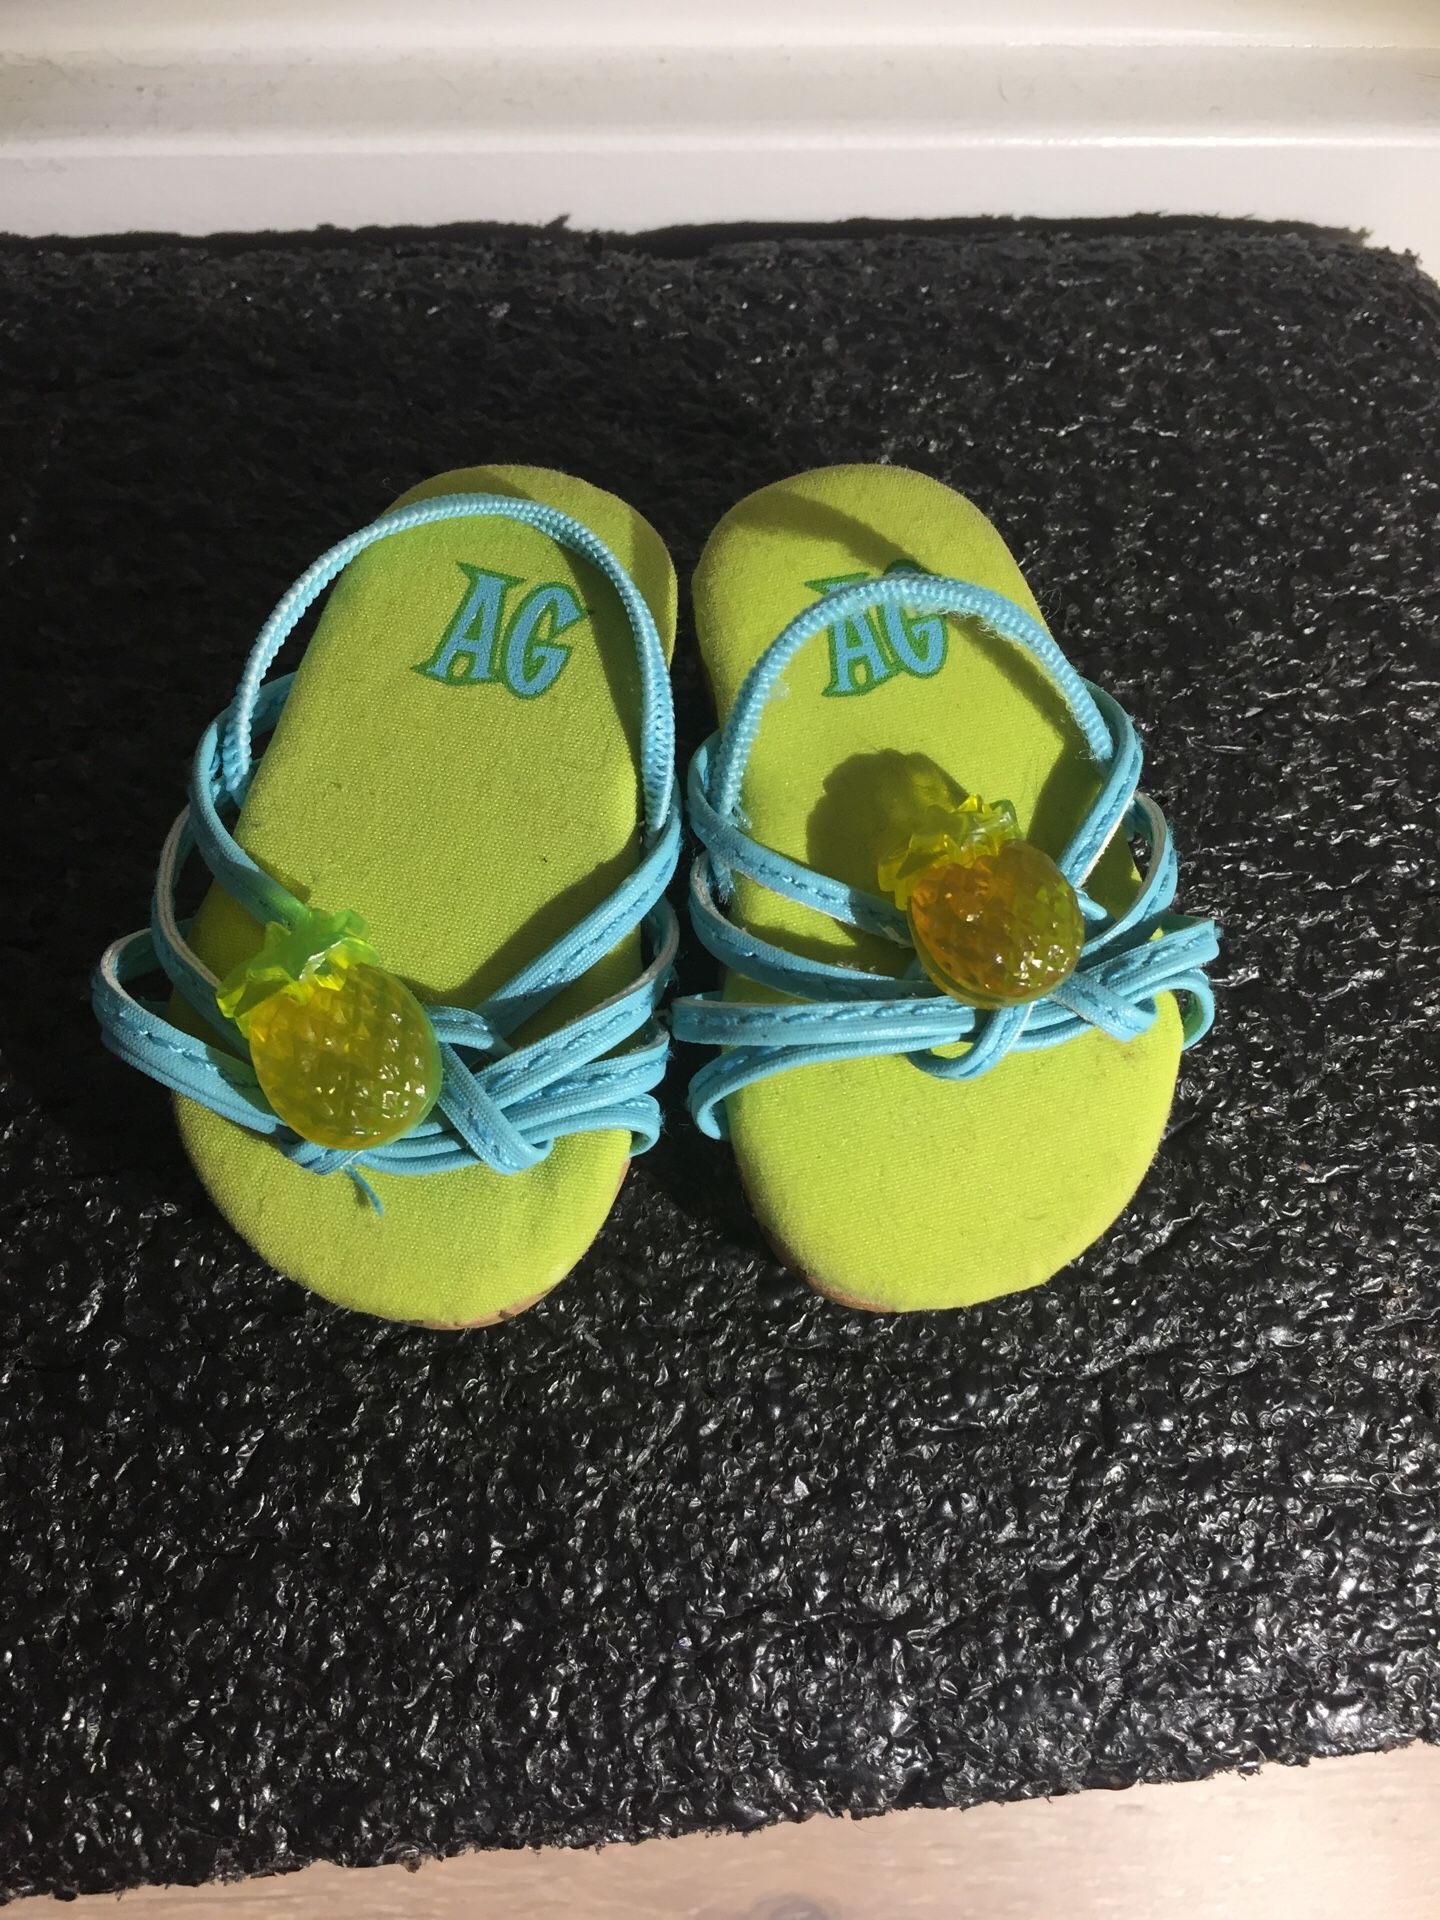 American Girl Doll shoes